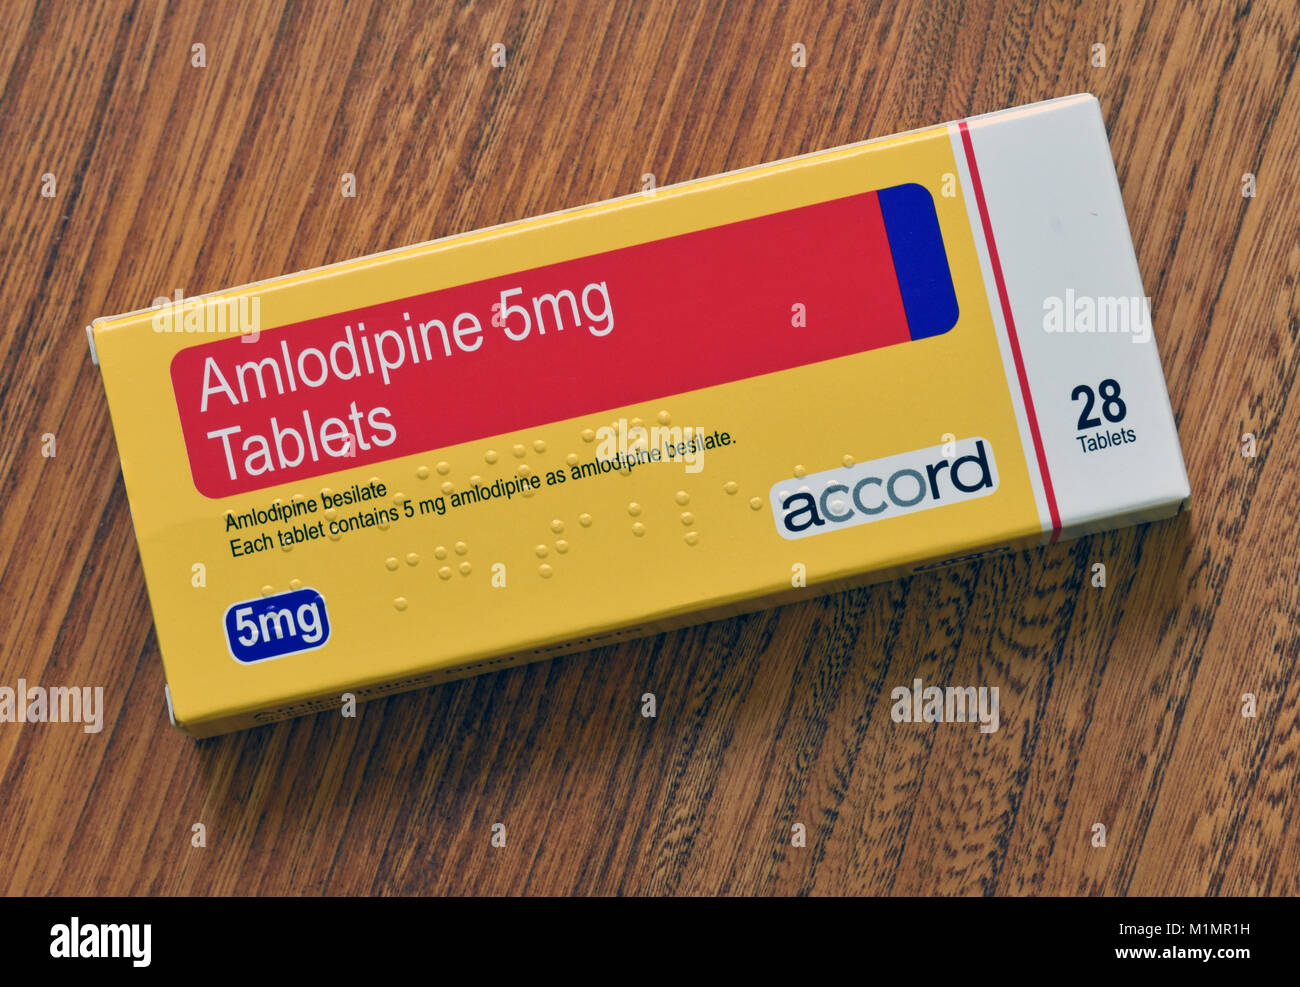 Photograph of Pack of Amlodipine 5mg. Tablets. 28 tablets. Amlodipine besilate. Each tablet contains 5mg amlodipine besilate. Accord. Stock Photo